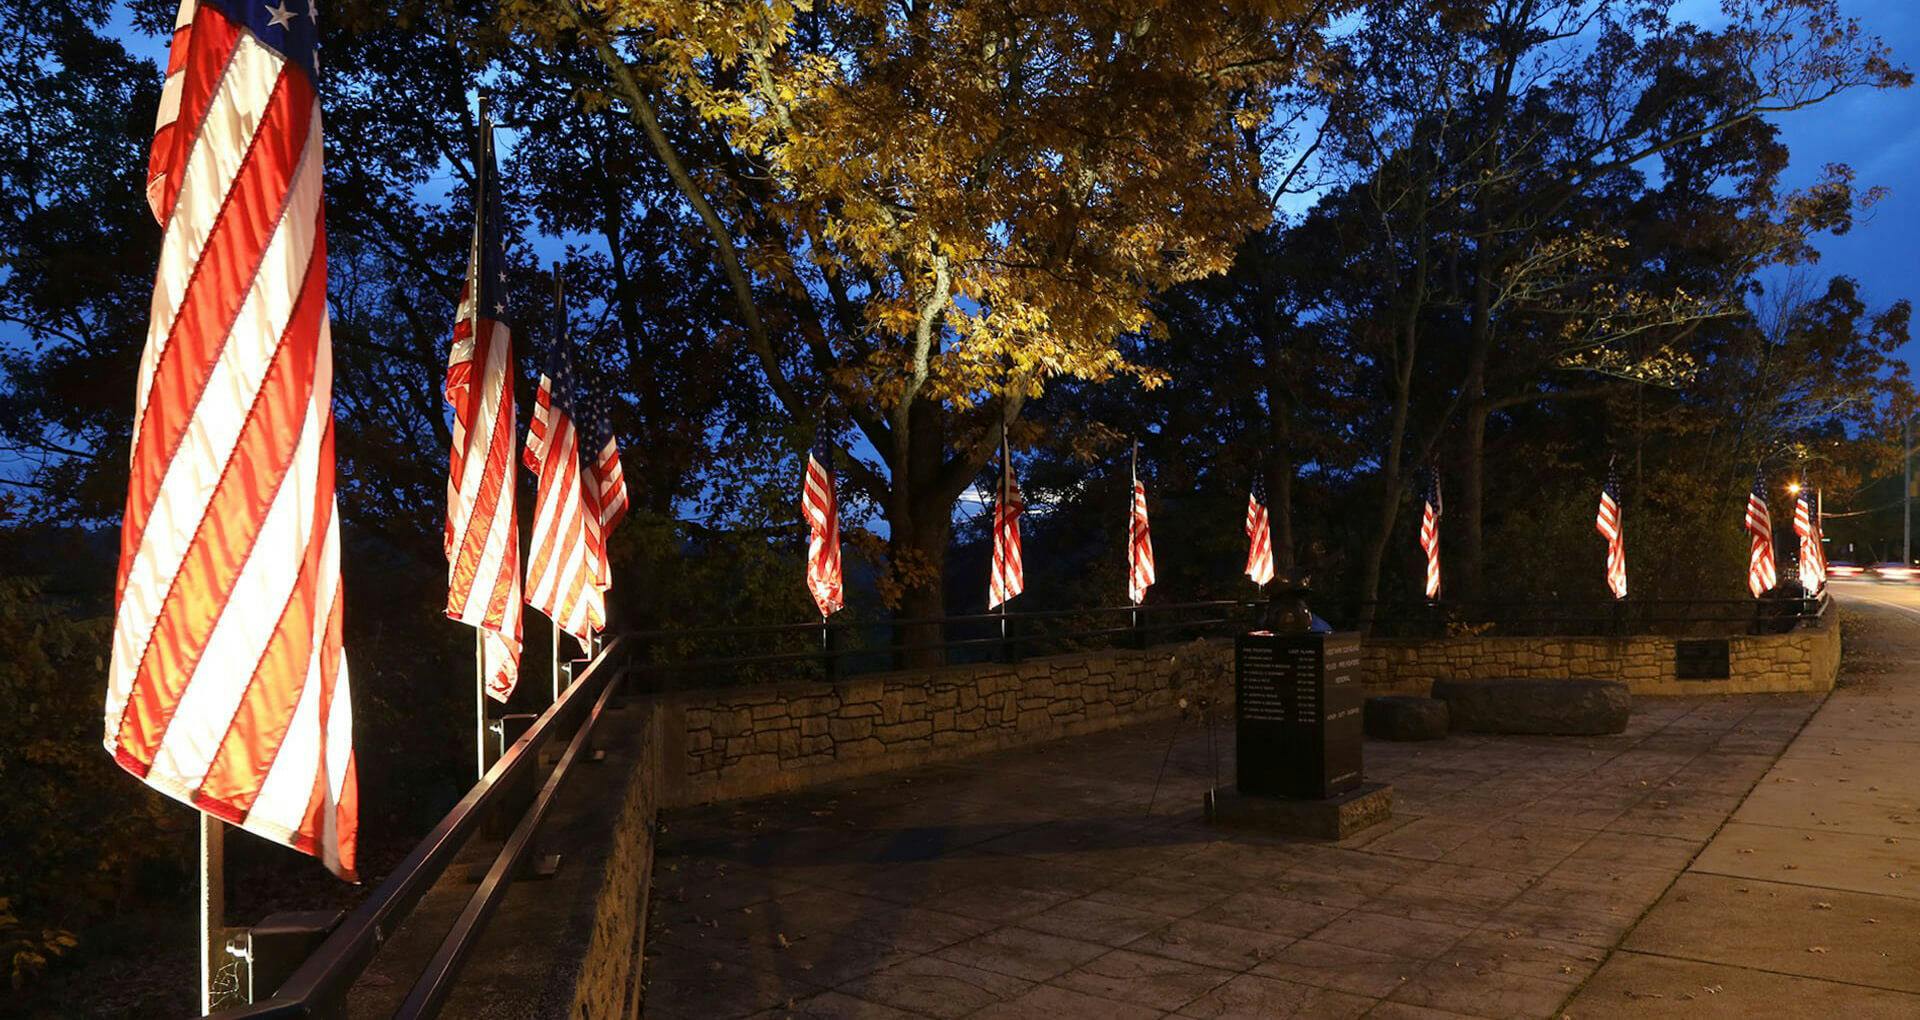 West Park memorial at night with several American flags hanging and features uplighting on each